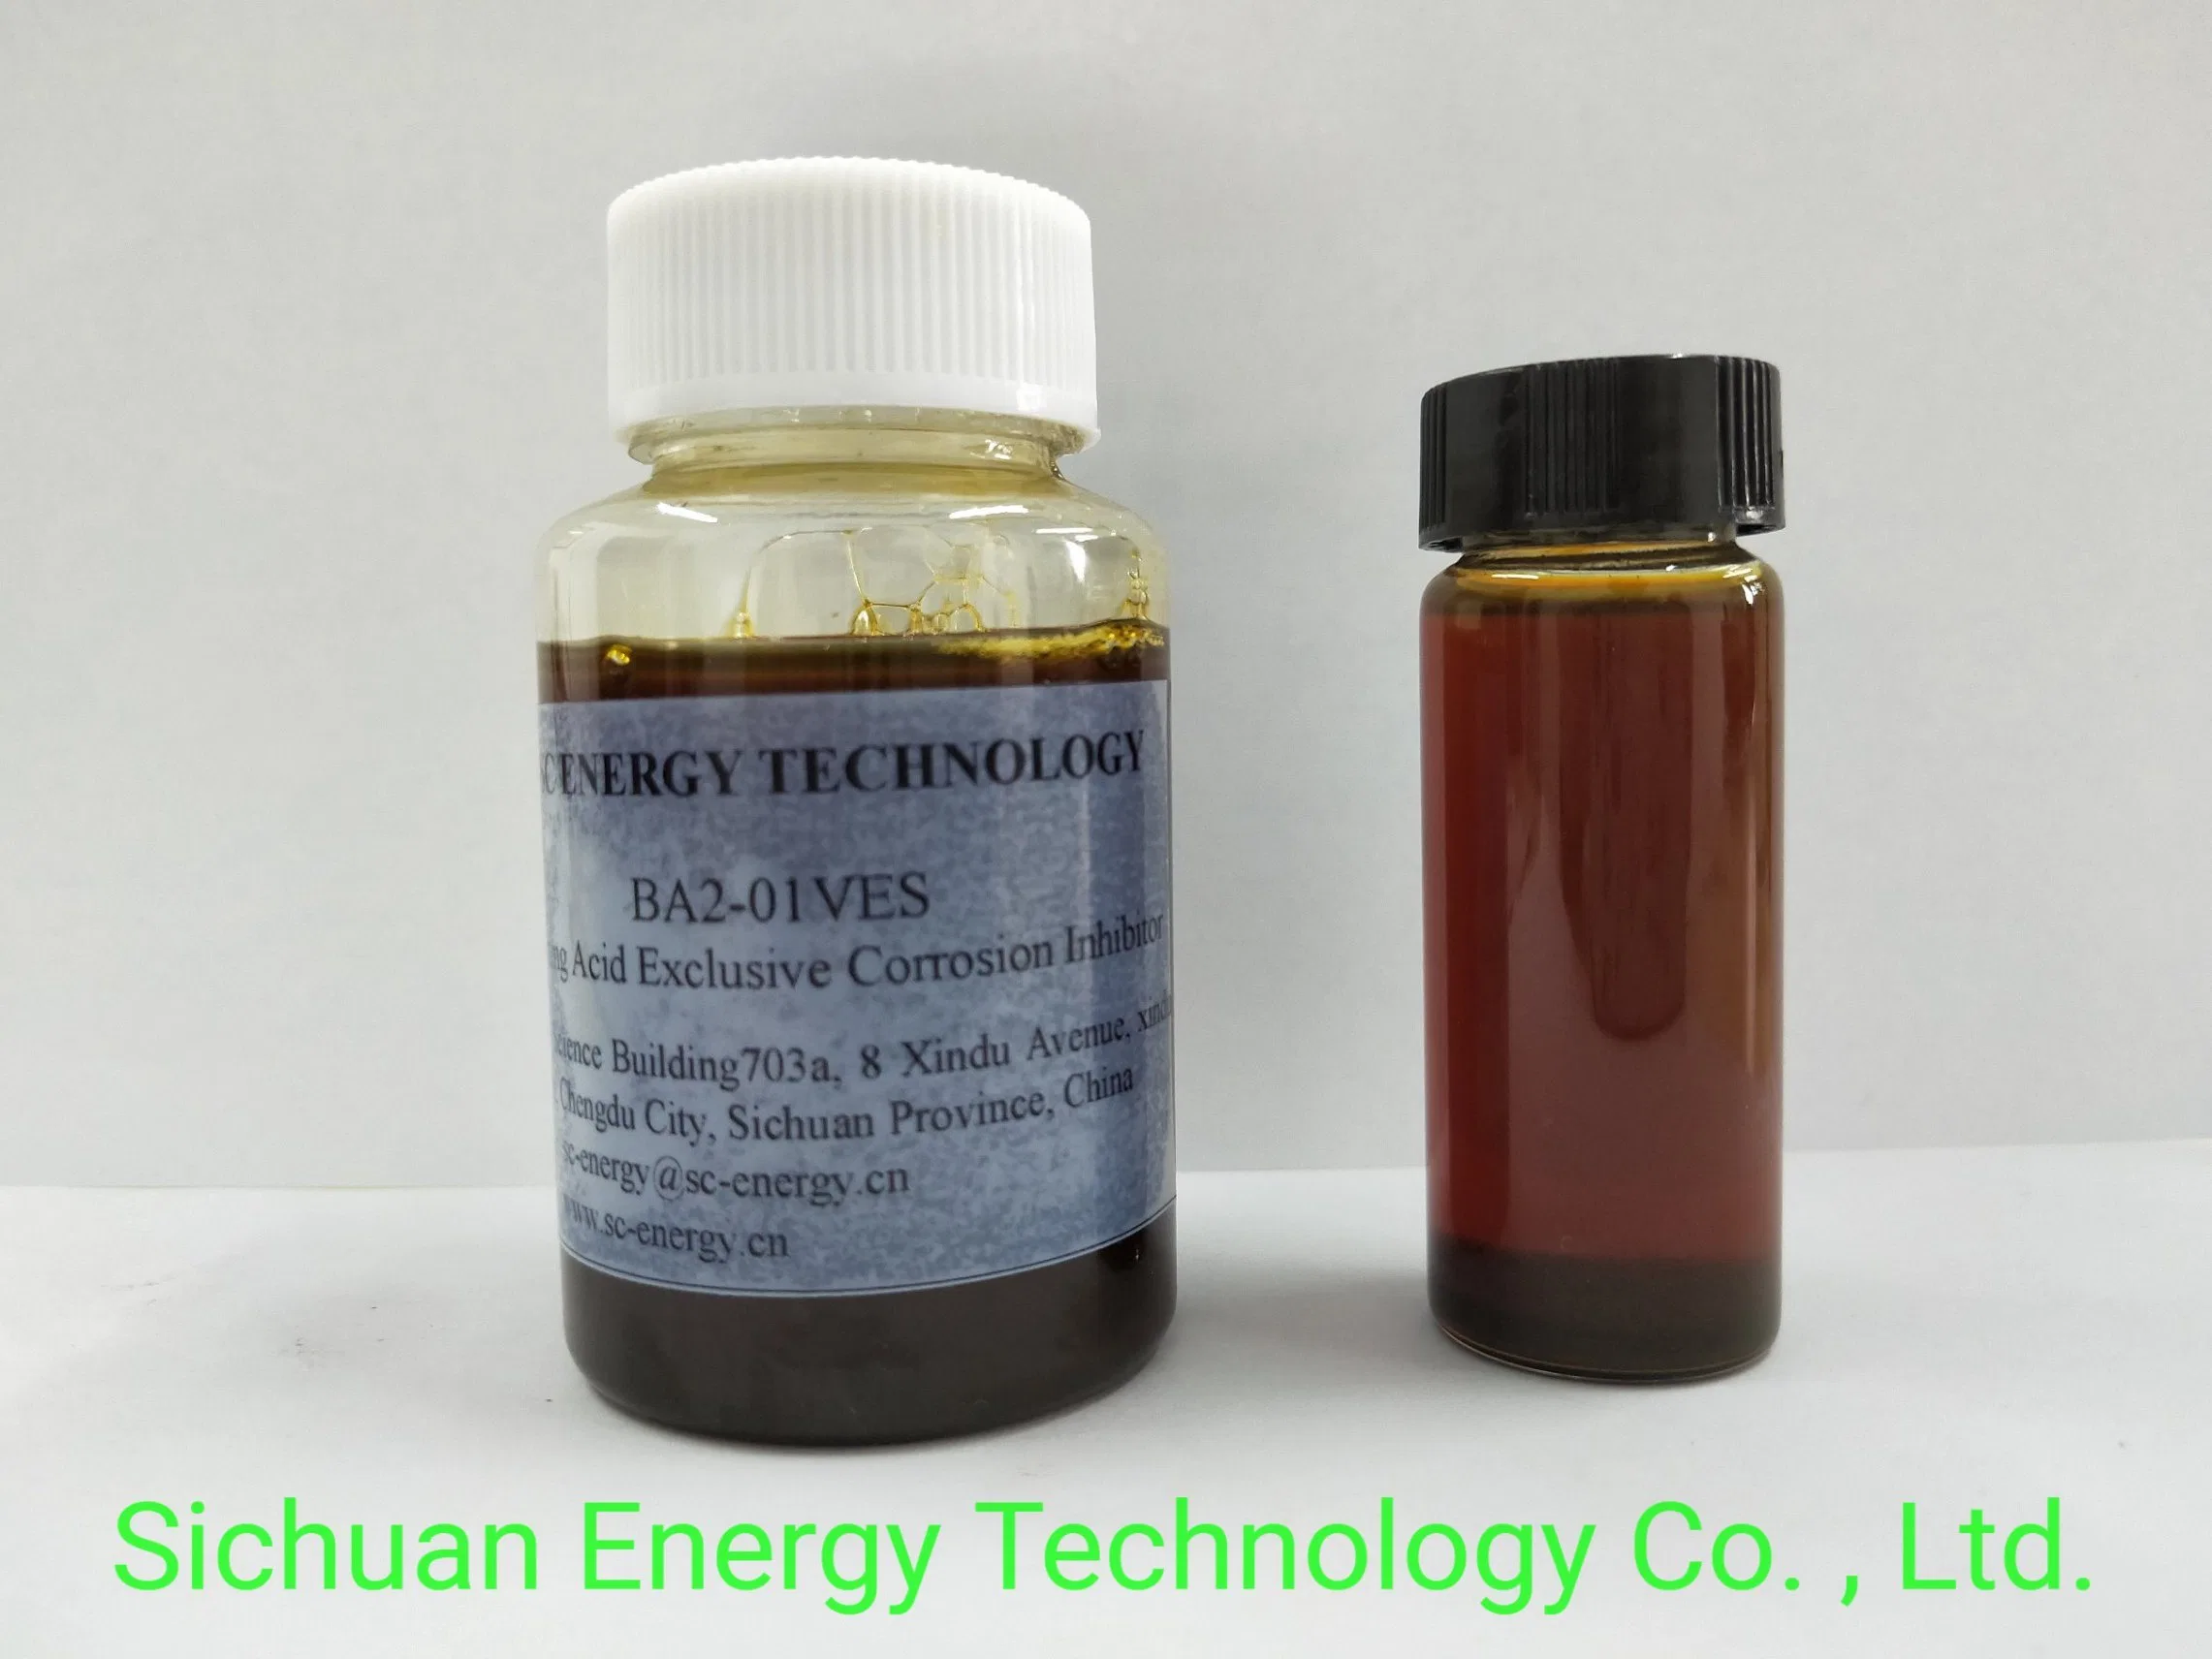 Acid Fractring Stimulation Viscoelastic Diverting (VDA) Hydrochloric Acid (HCl) Exclusive Corrosion Inhibitor Petroleum Additives- High Temperature-01